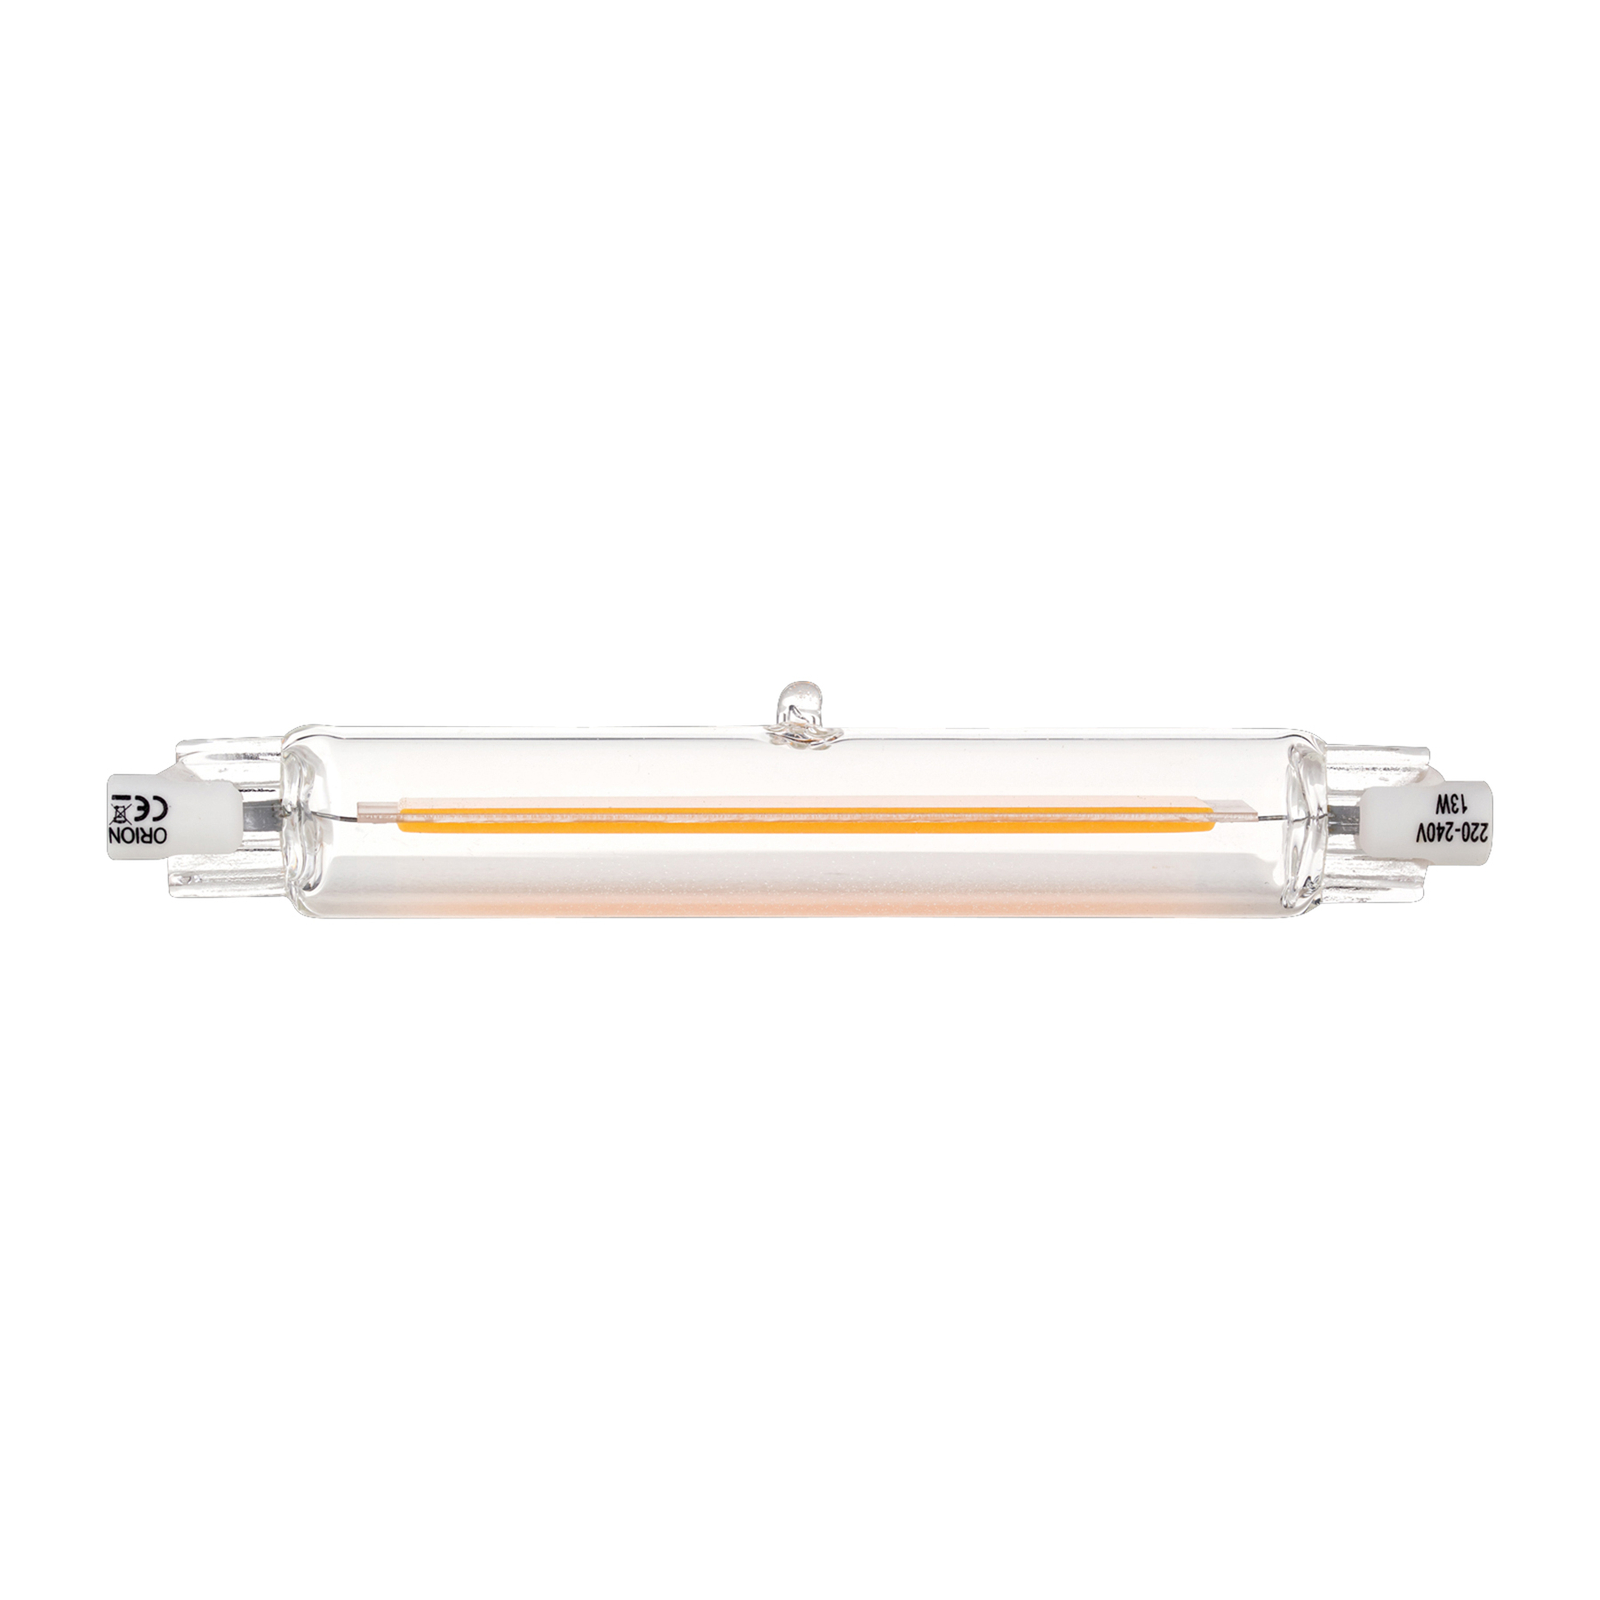 LED staaflamp R7s mm 10W 3.000K filament | Lampen24.nl